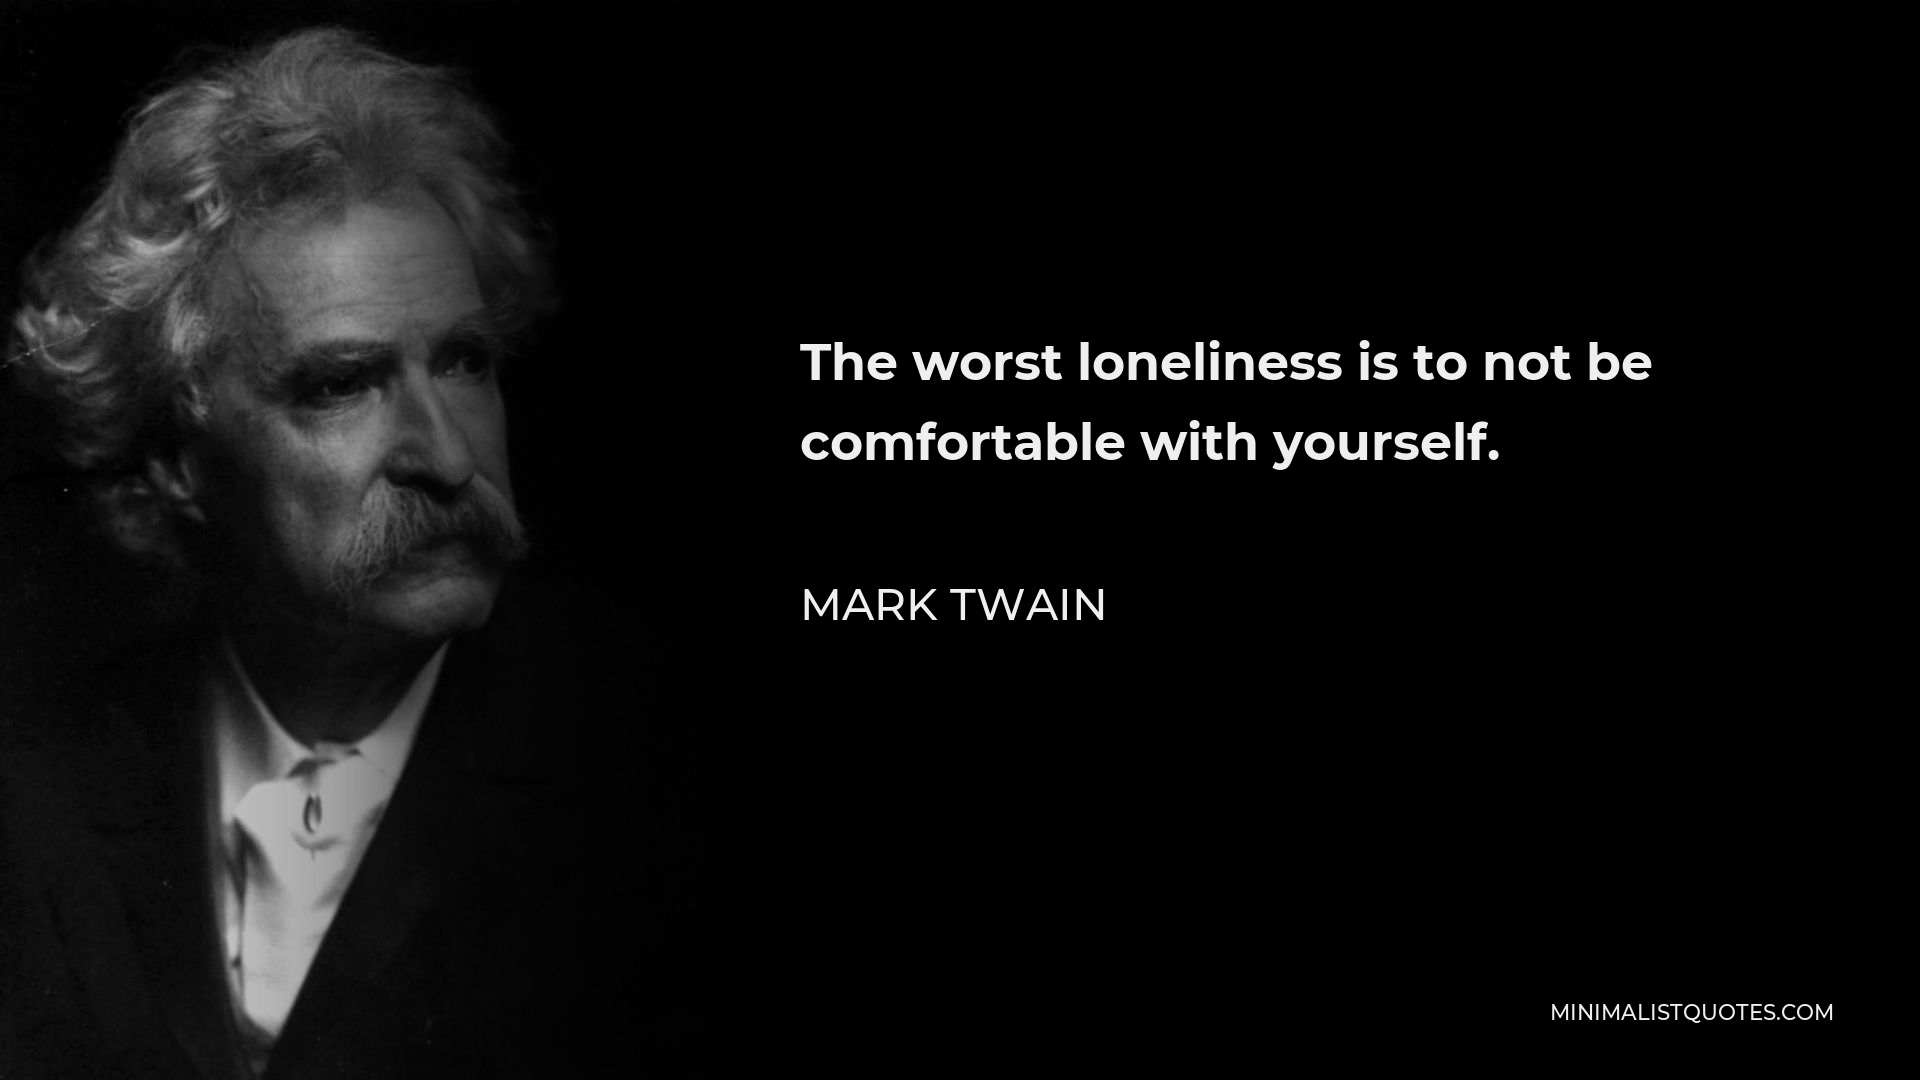 Mark Twain Quote - The worst loneliness is to not be comfortable with yourself.